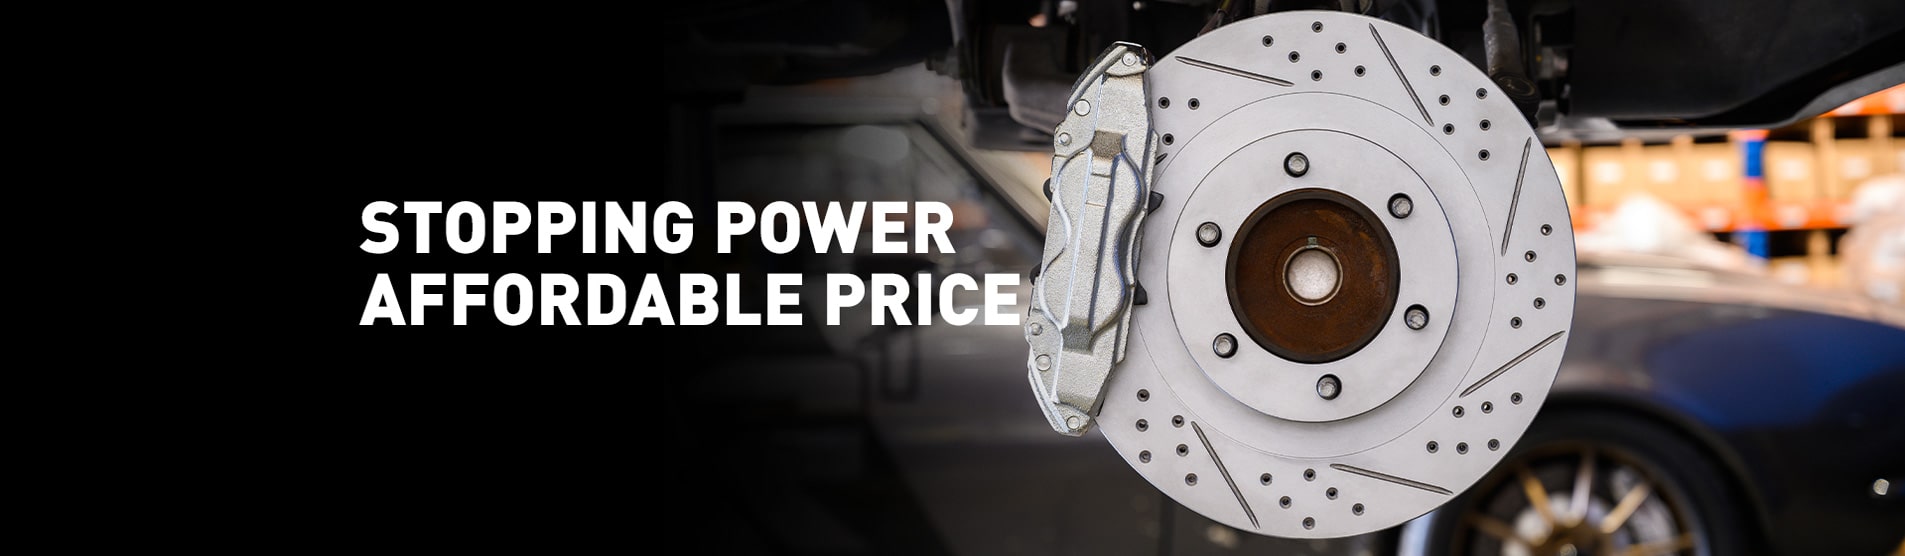  Stopping Power Affordable Price 